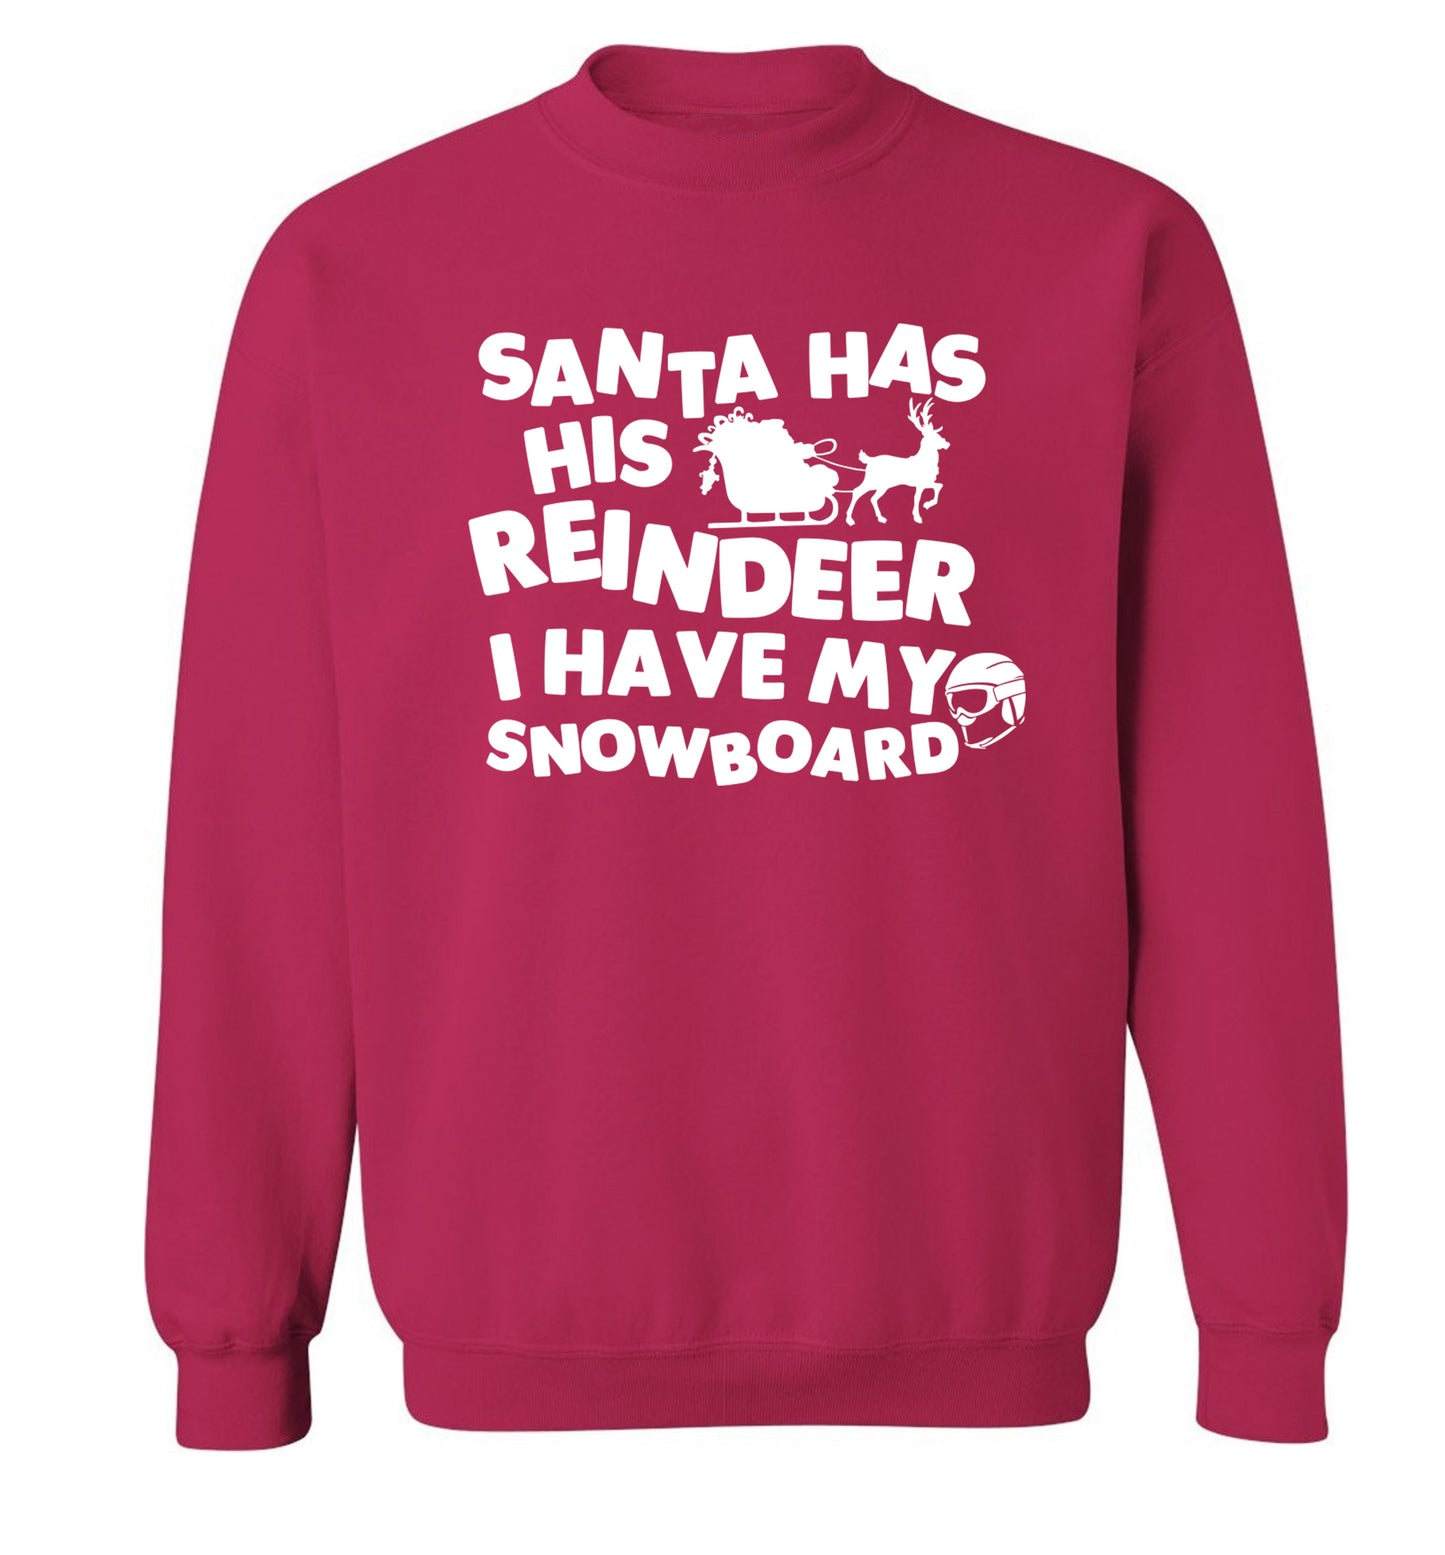 Santa has his reindeer I have my snowboard Adult's unisex pink Sweater 2XL